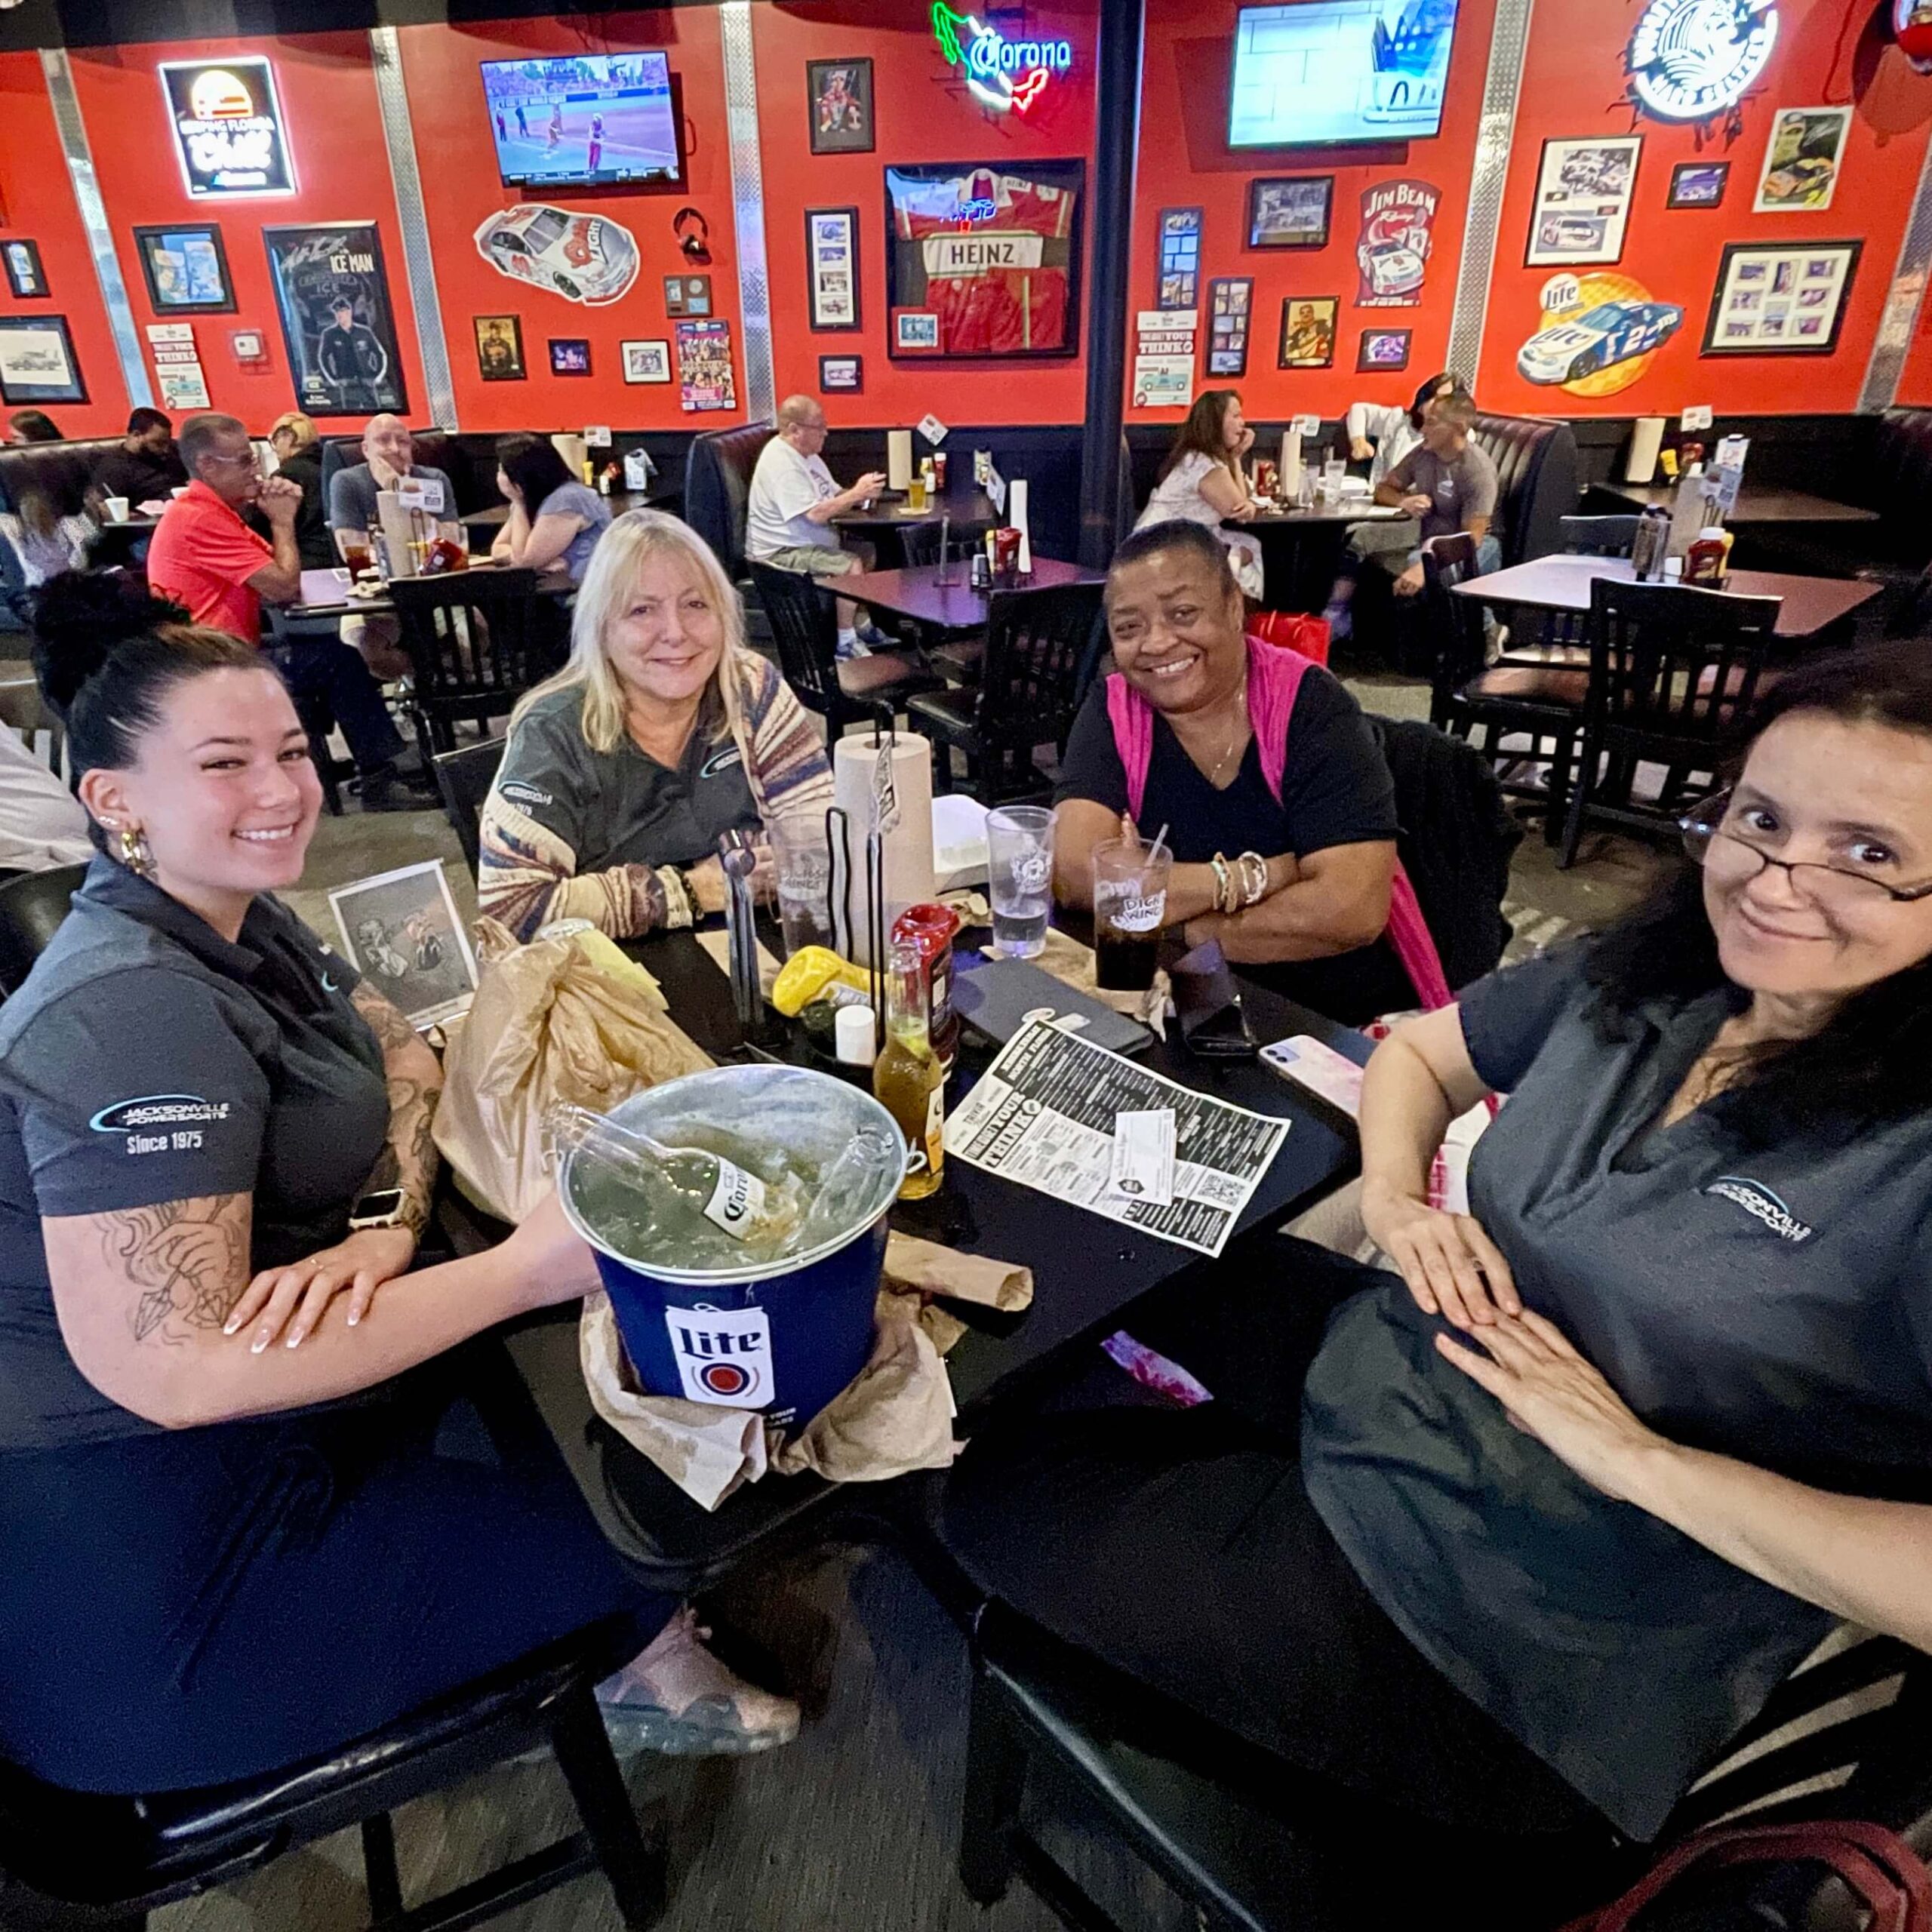 Dick's Wings and Grill Jacksonville FL 32225 trivia night 5